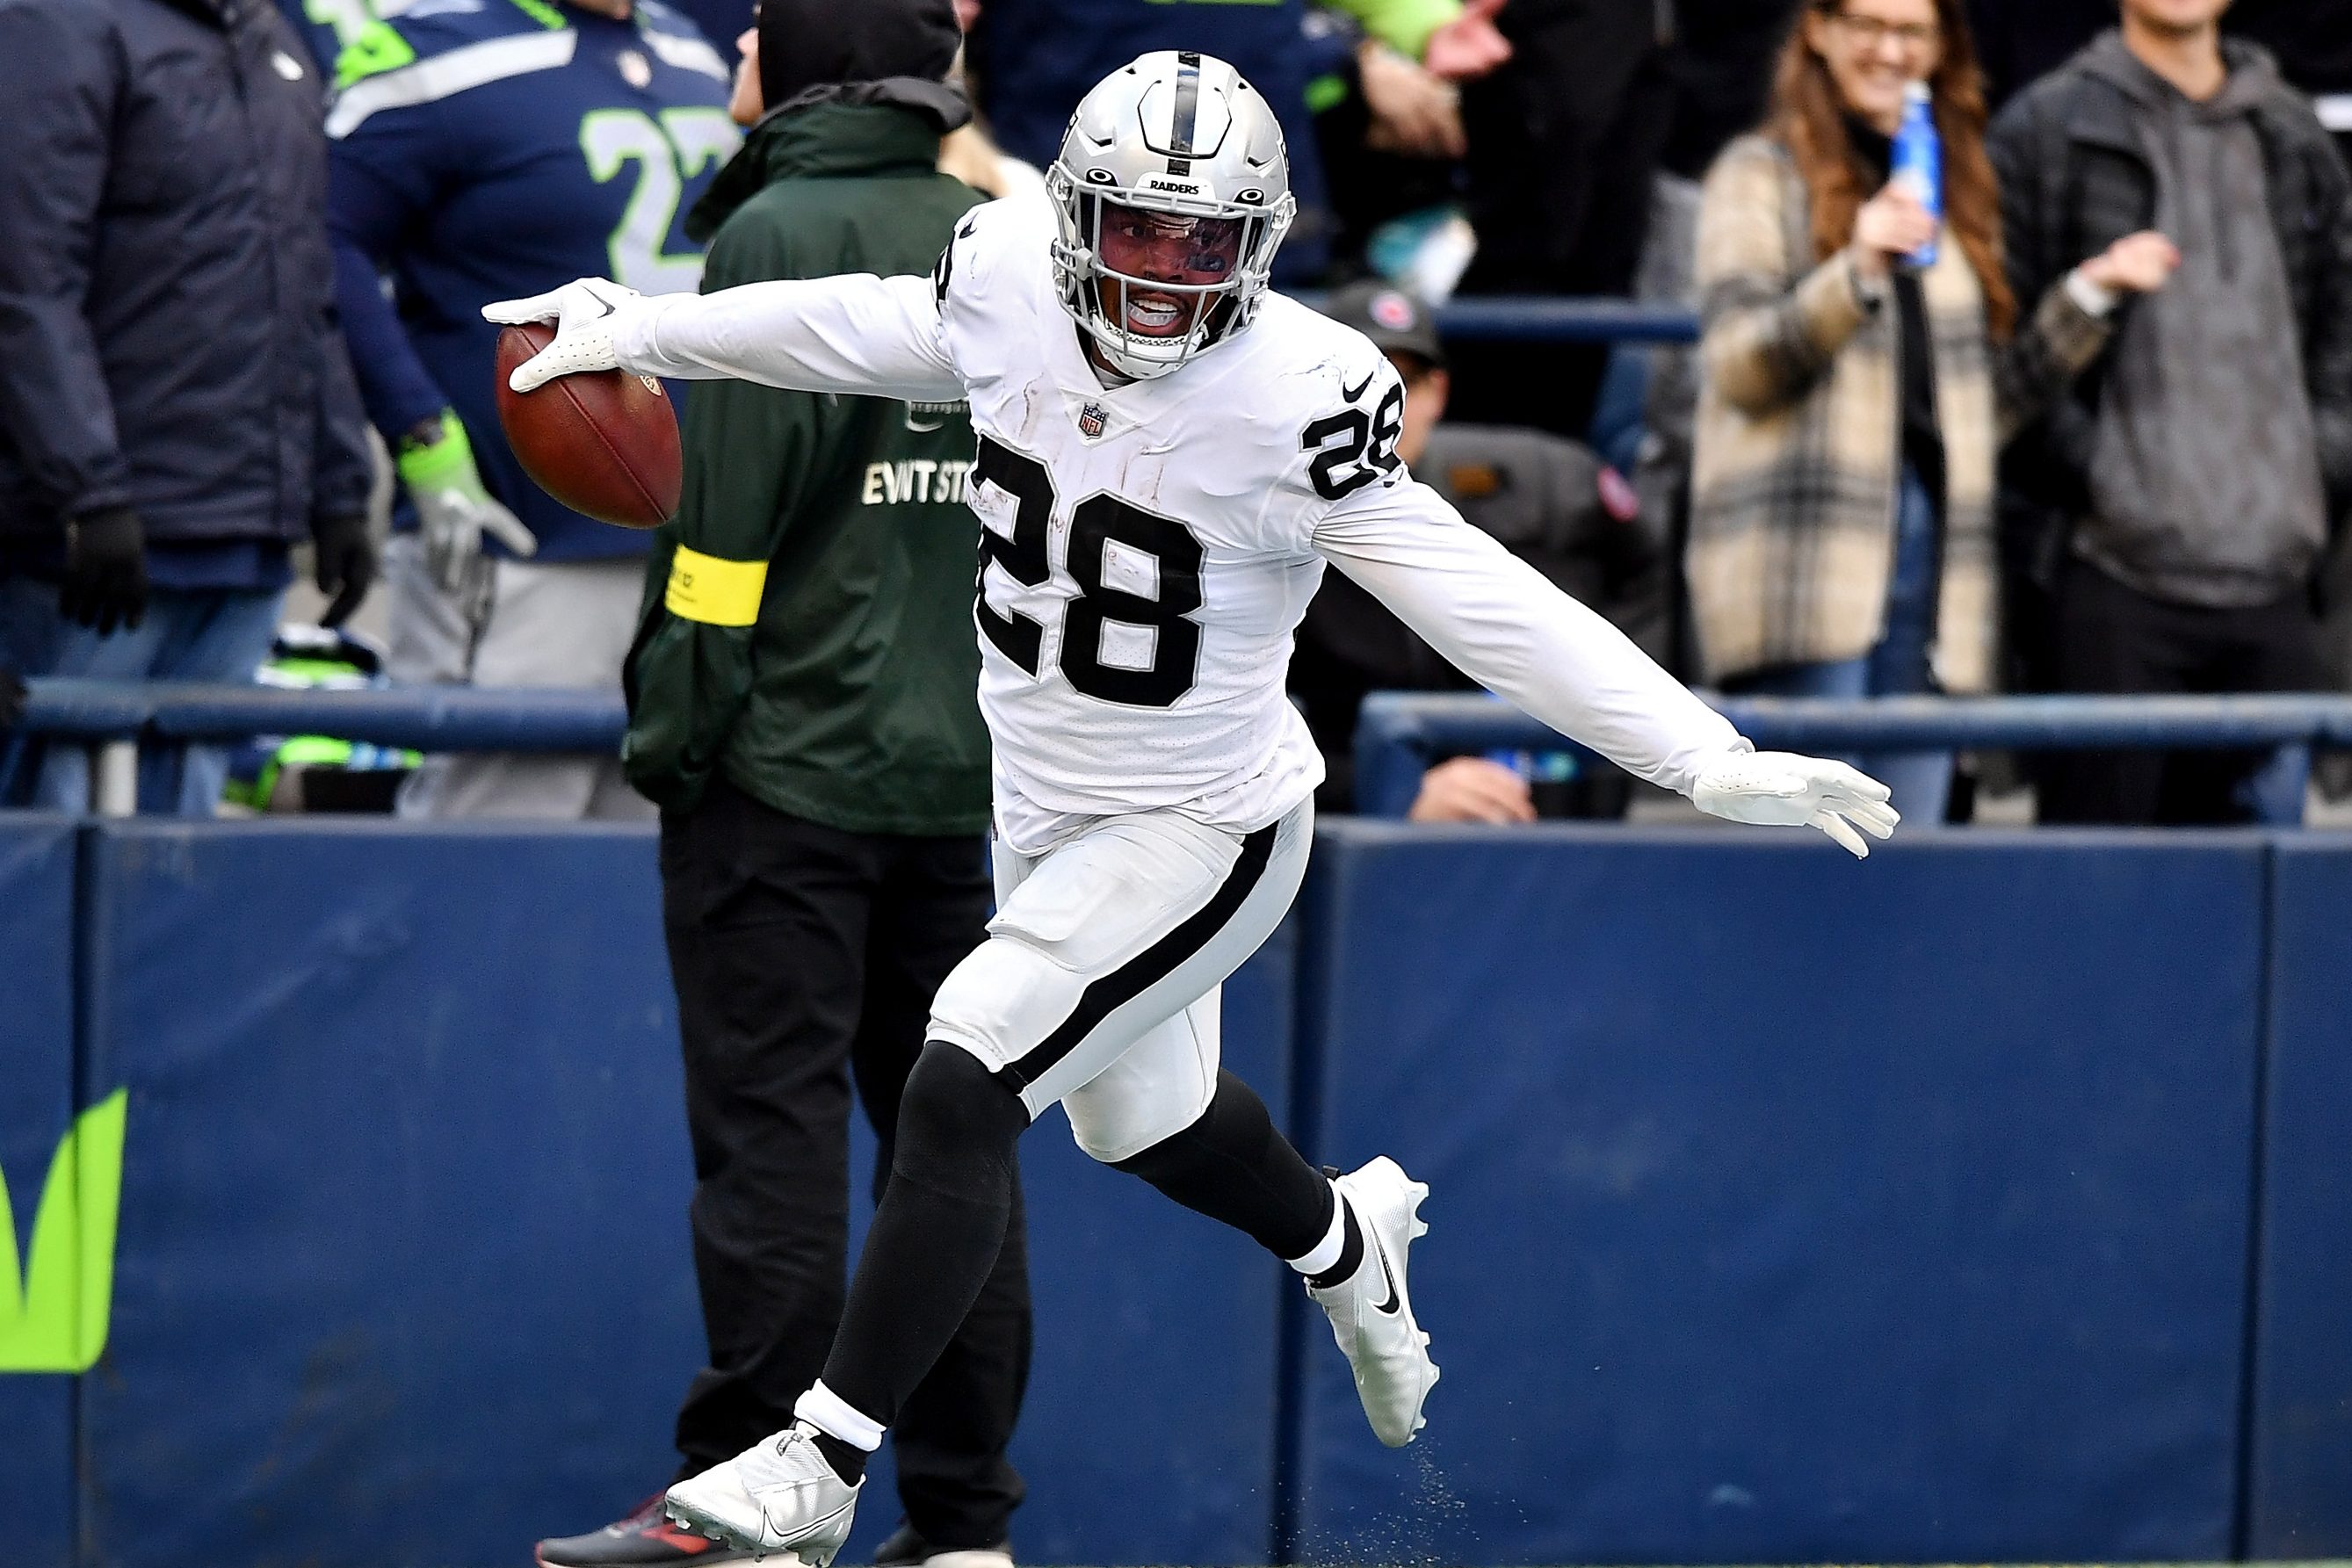 Josh Jacobs of the Raiders celebrates a touchdown against the Seahawks.